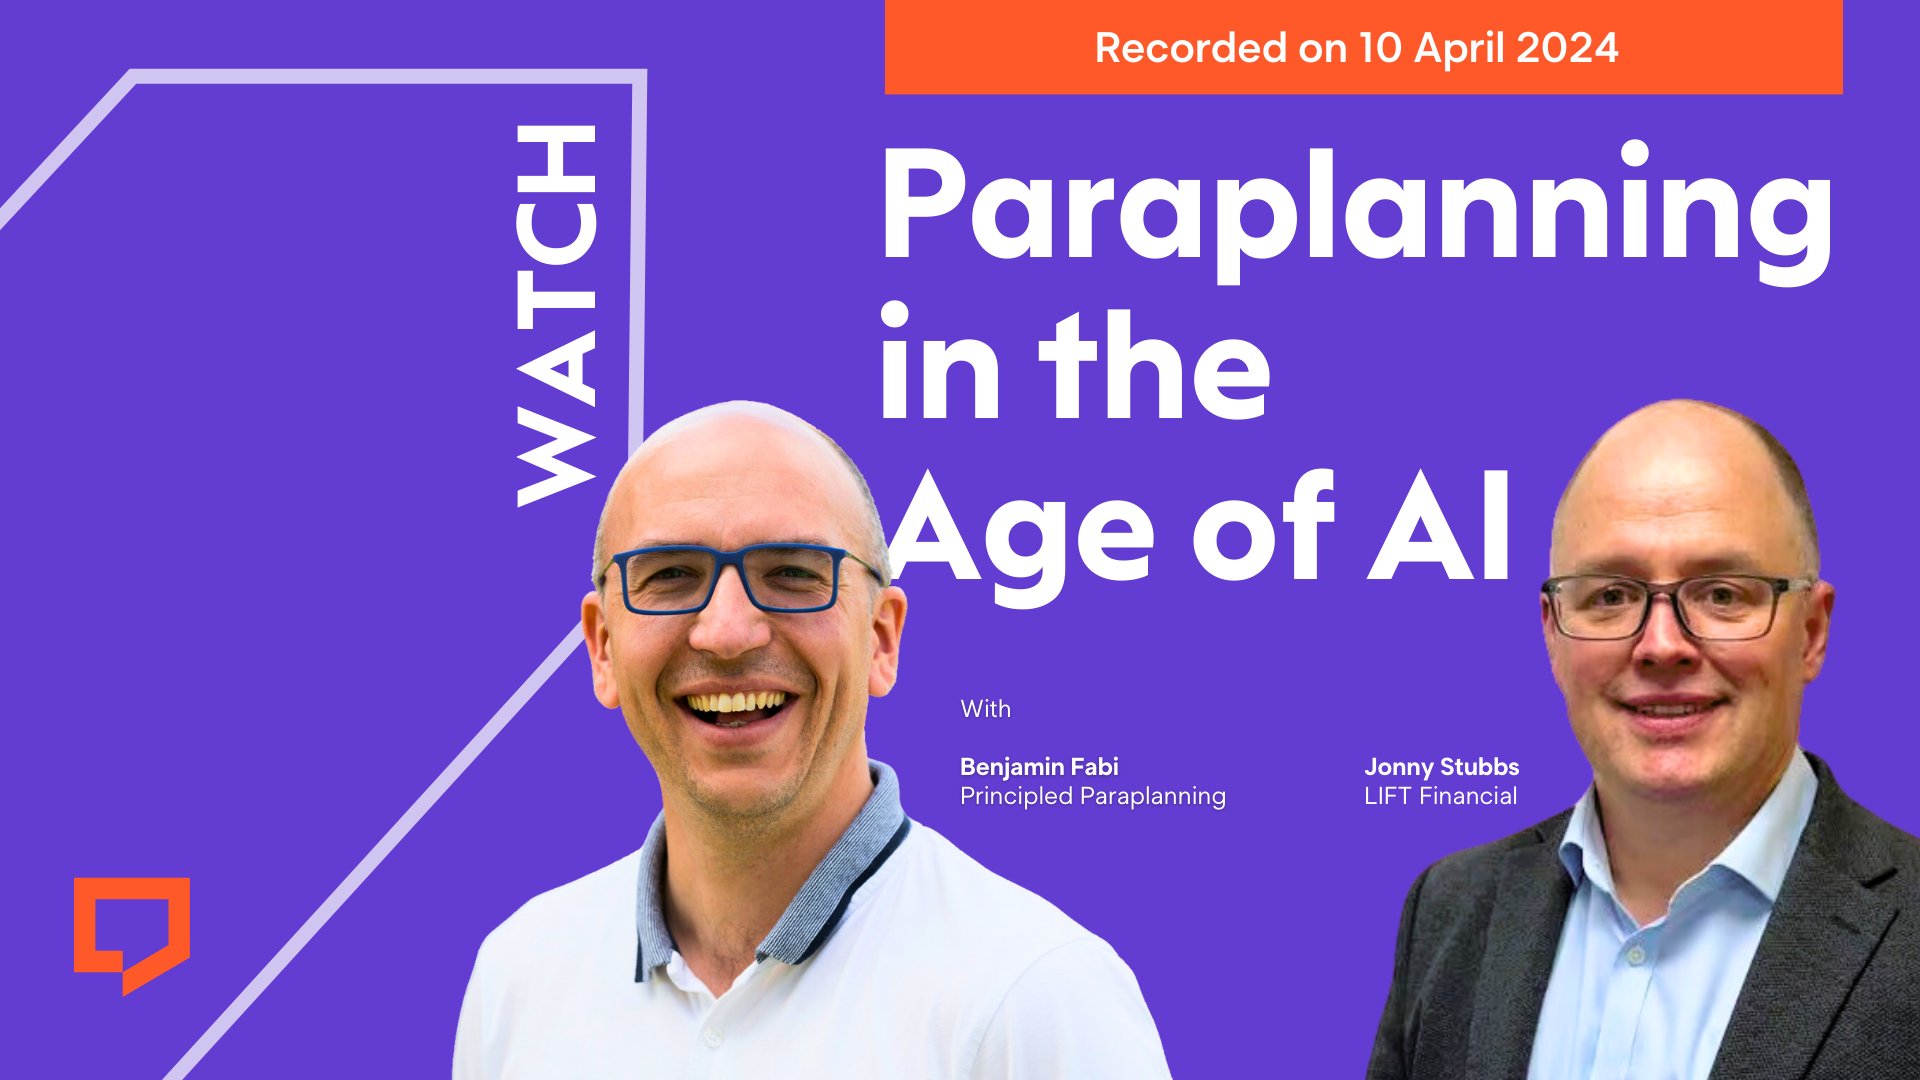 Recorded on 10 April 2024. Paraplanning in the Age of AI with Benjamin Fabi of Principled Paraplanning and Jonny Stubbs of LIFT Financial